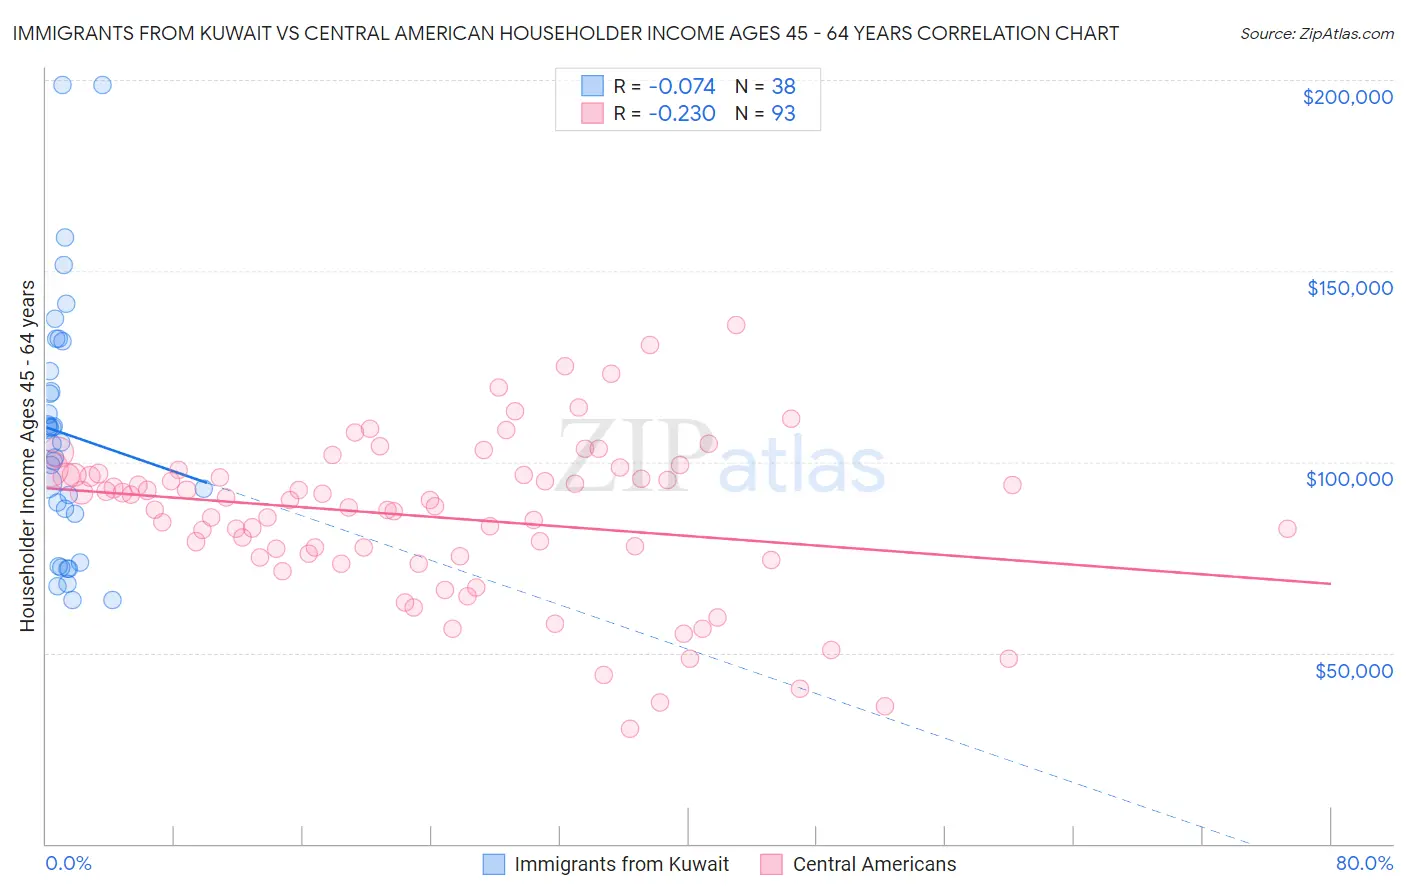 Immigrants from Kuwait vs Central American Householder Income Ages 45 - 64 years